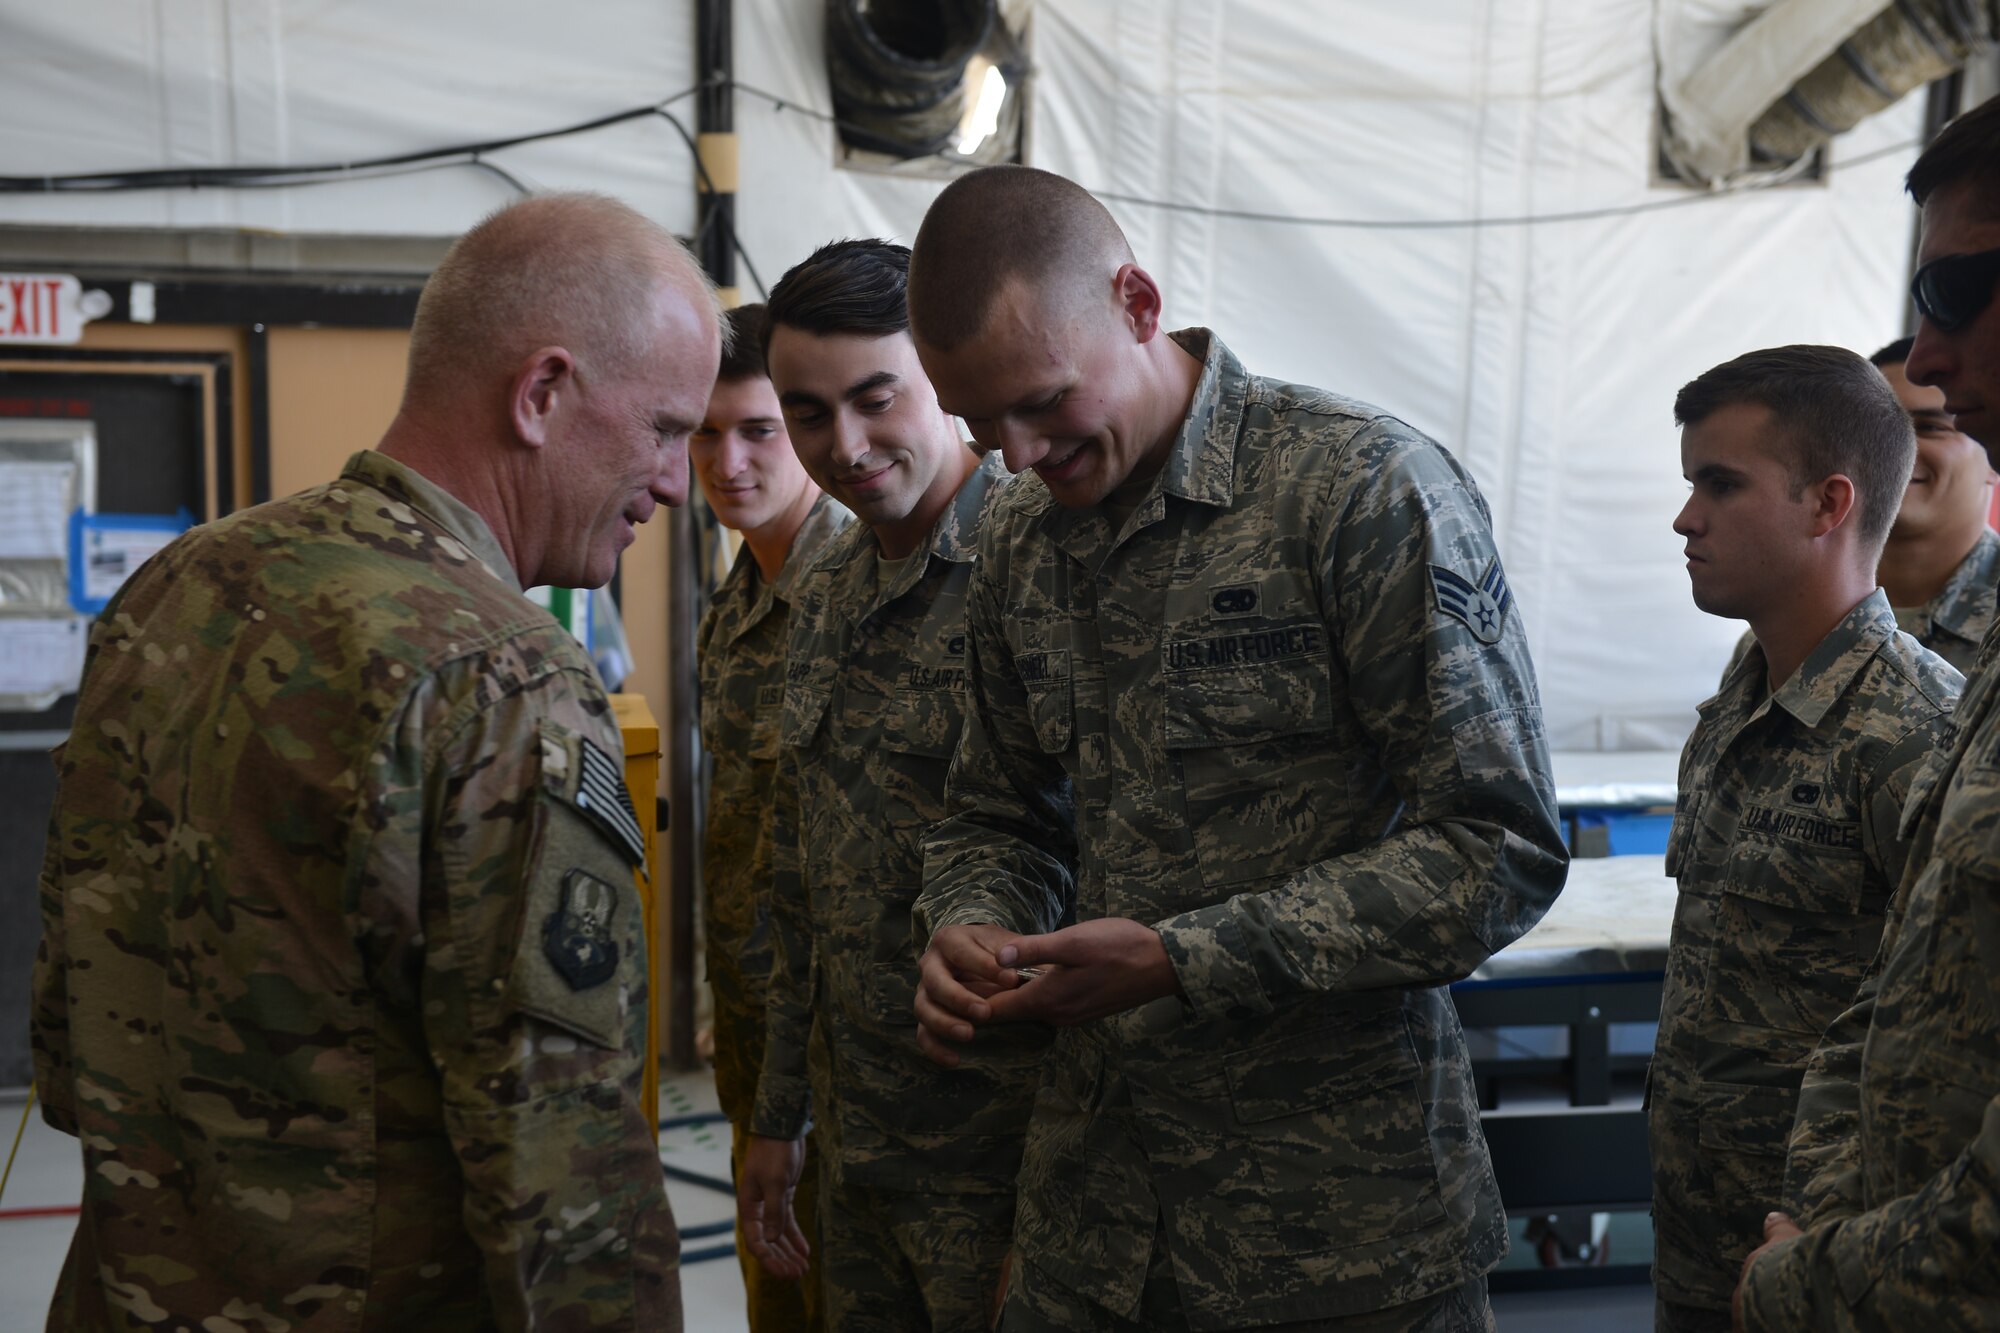 U.S. Air Force Airman 1st Class Anthony Gosnell shows Chief Master  Sgt. Frank Batten, command chief of Air Combat Command a coin he received from Gen. Mike Holmes, commander of Air Combat Command for being an
 outstanding performer Feb. 11, 2018, on Al Dhafra Air Base, United Arab  Emirates. Holmes visited Airman and talked with them about Air Force priorities and the importance of their role in the mission. 
 (U.S. Air Force photo by Tech. Sgt. Anthony Nelson J.R.)